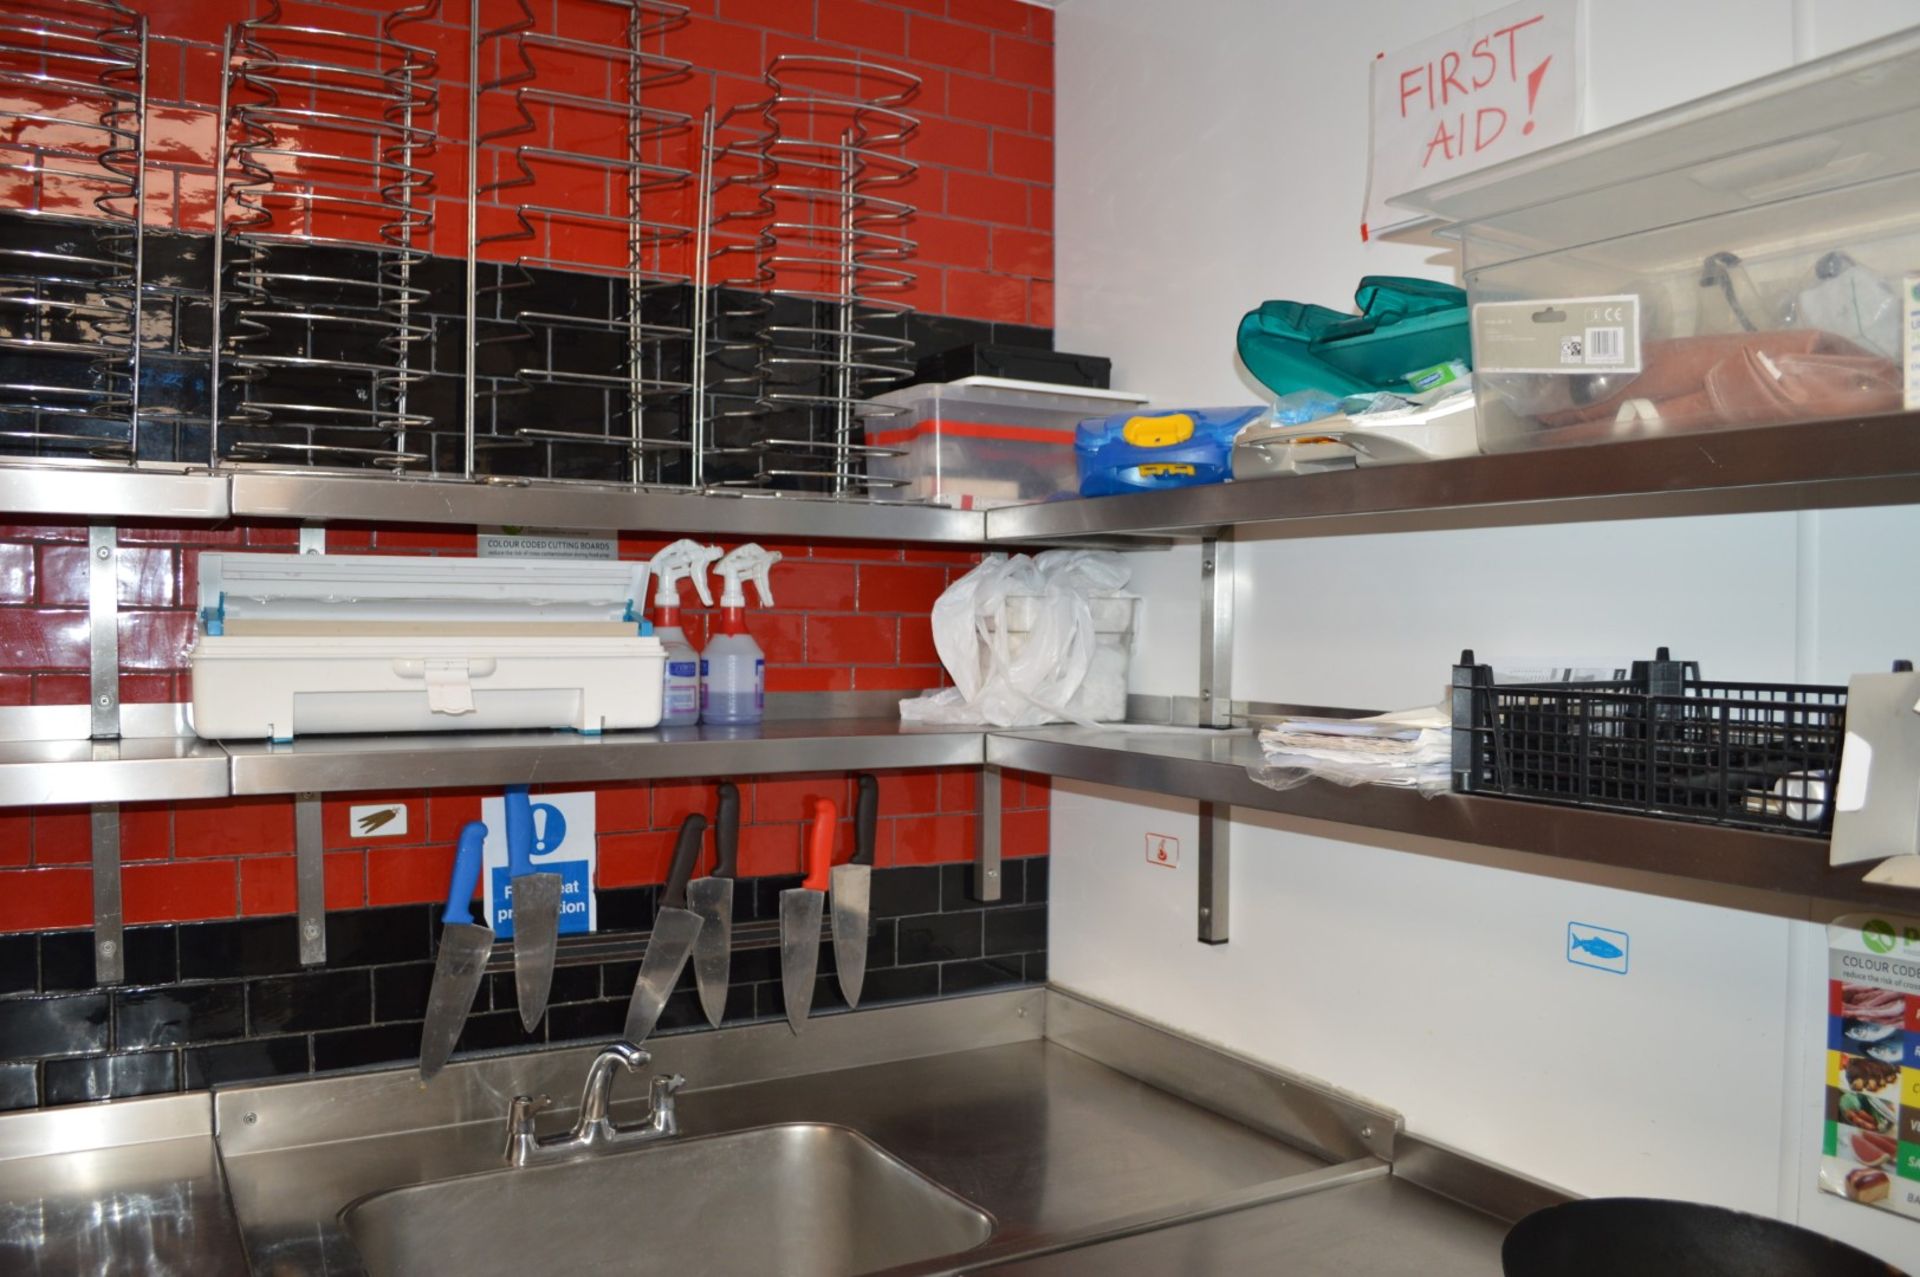 10 x Wall Mounted Stainless Steel Shelves - Various Sizes Included Ranging From 54cm and 160cm Width